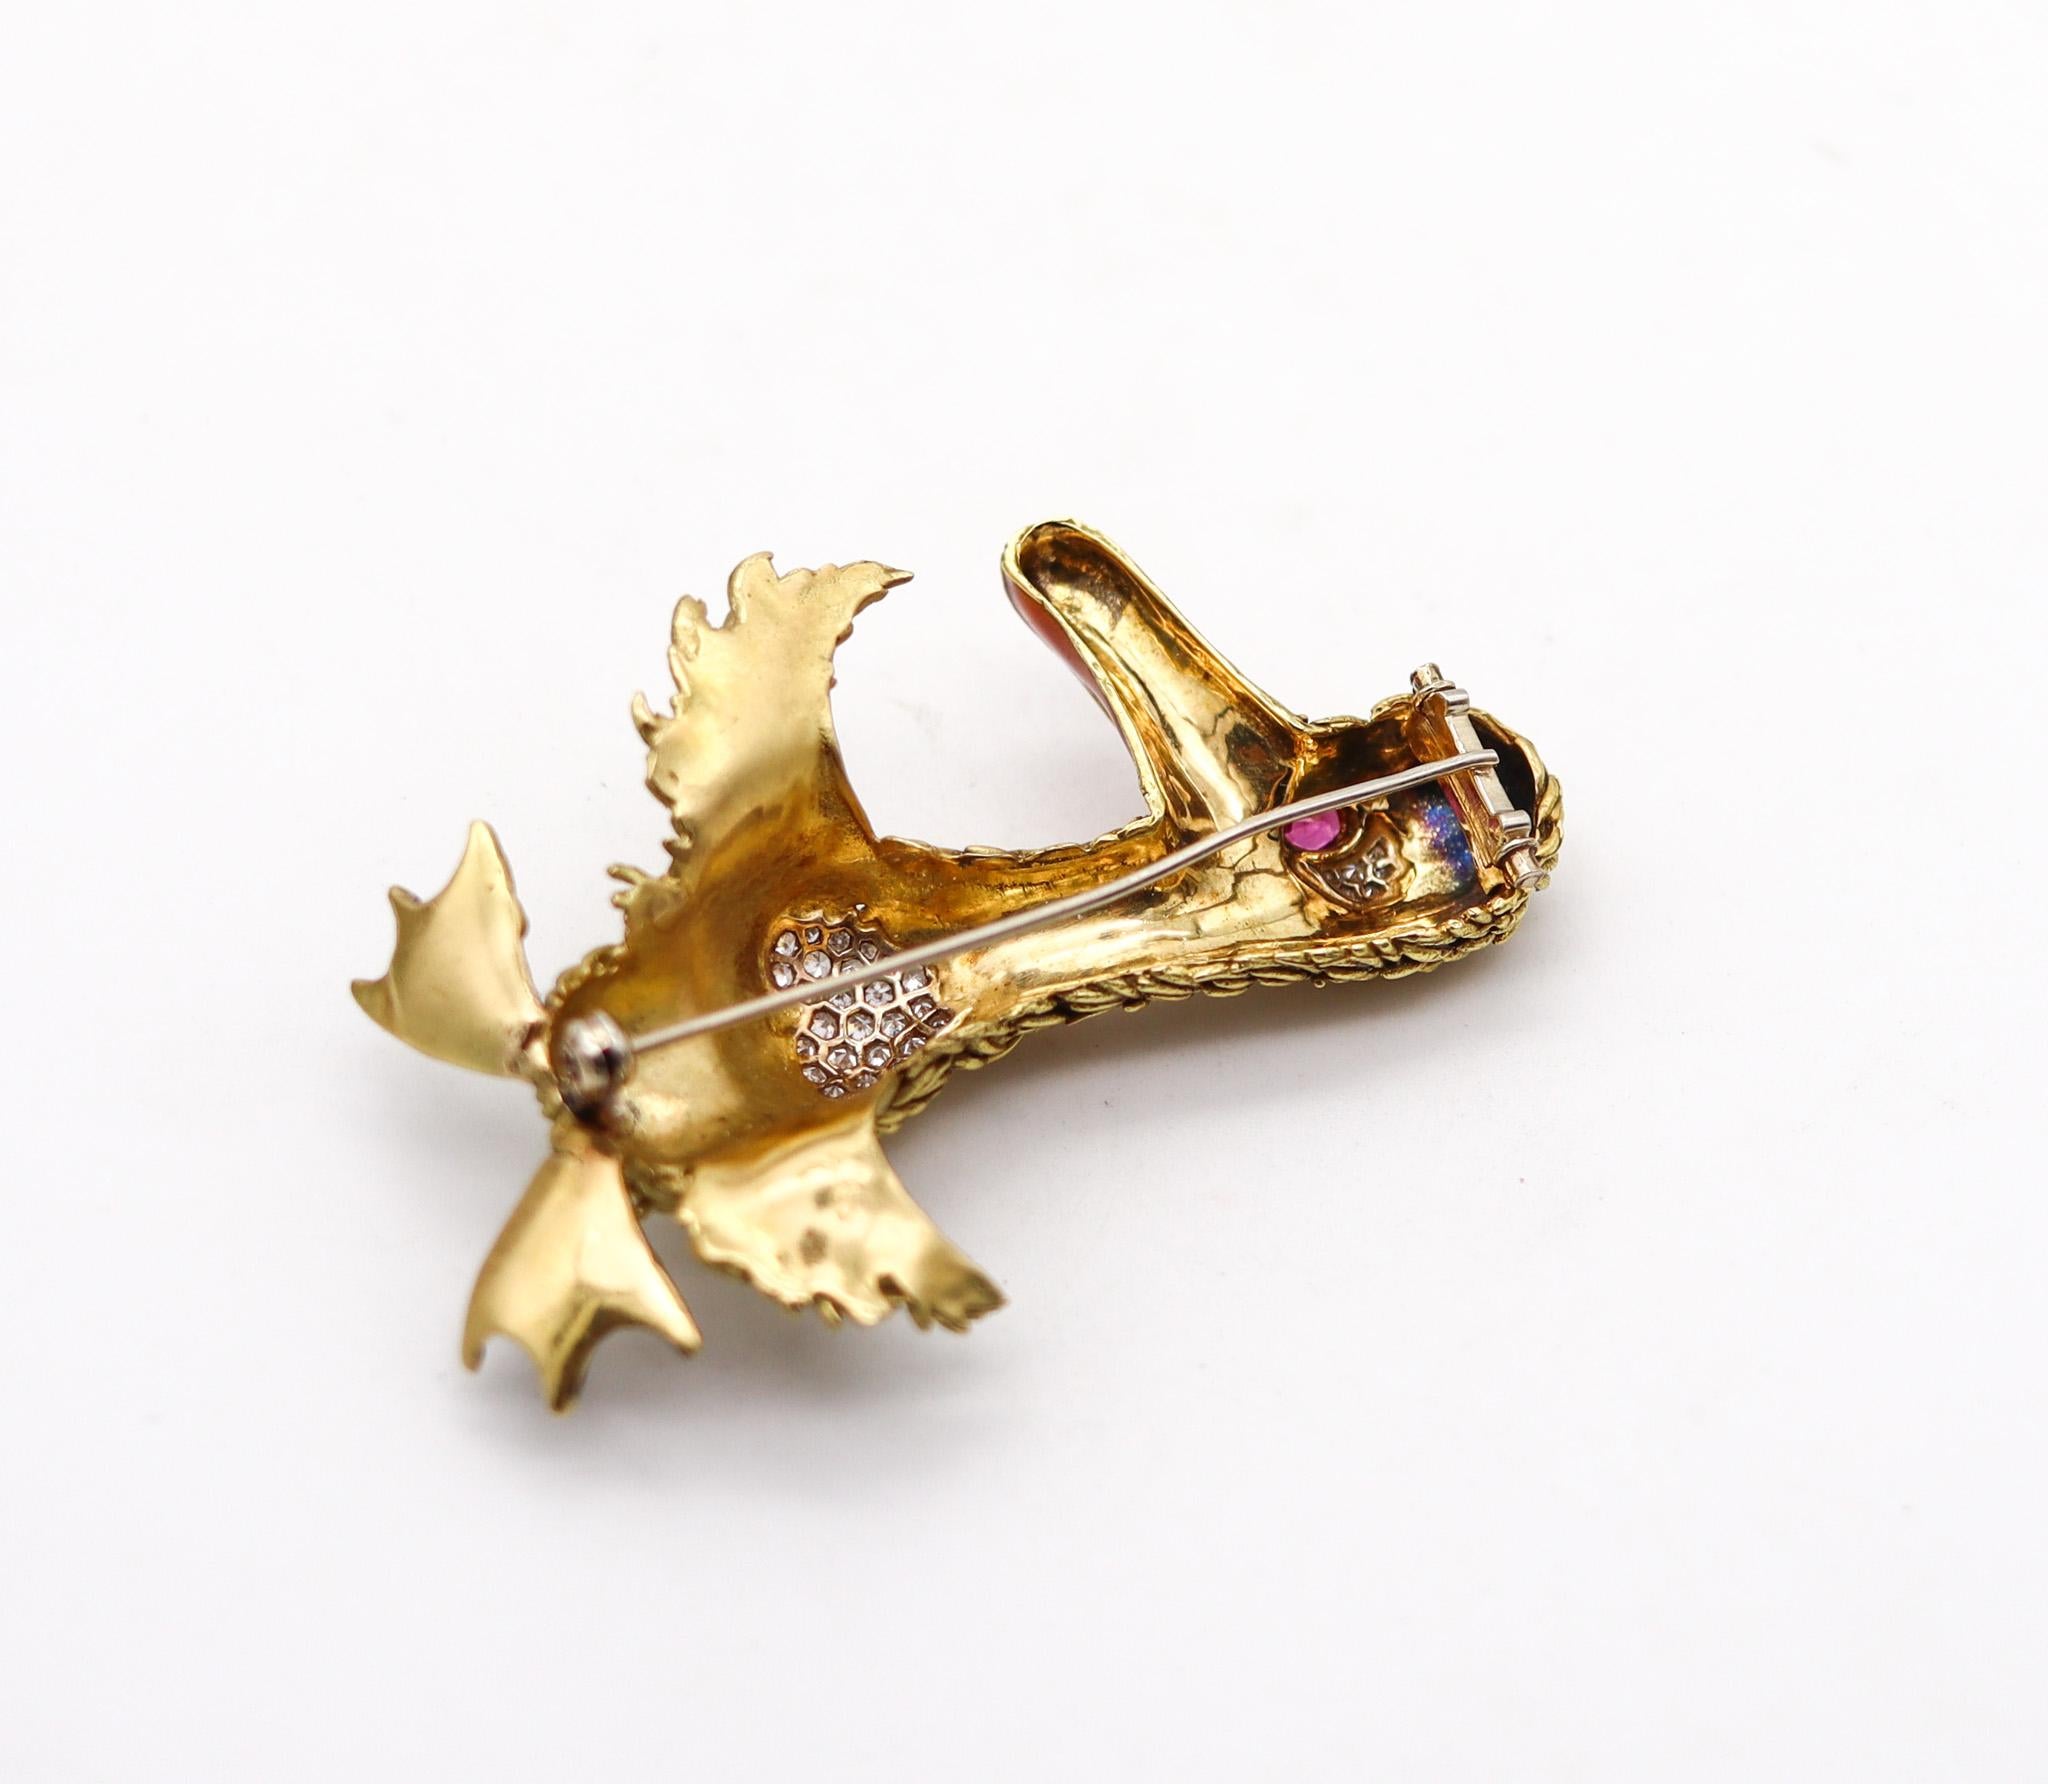 Frascarolo Milano Enameled Pelican Brooch 18Kt Yellow Gold With Diamonds & Ruby 1